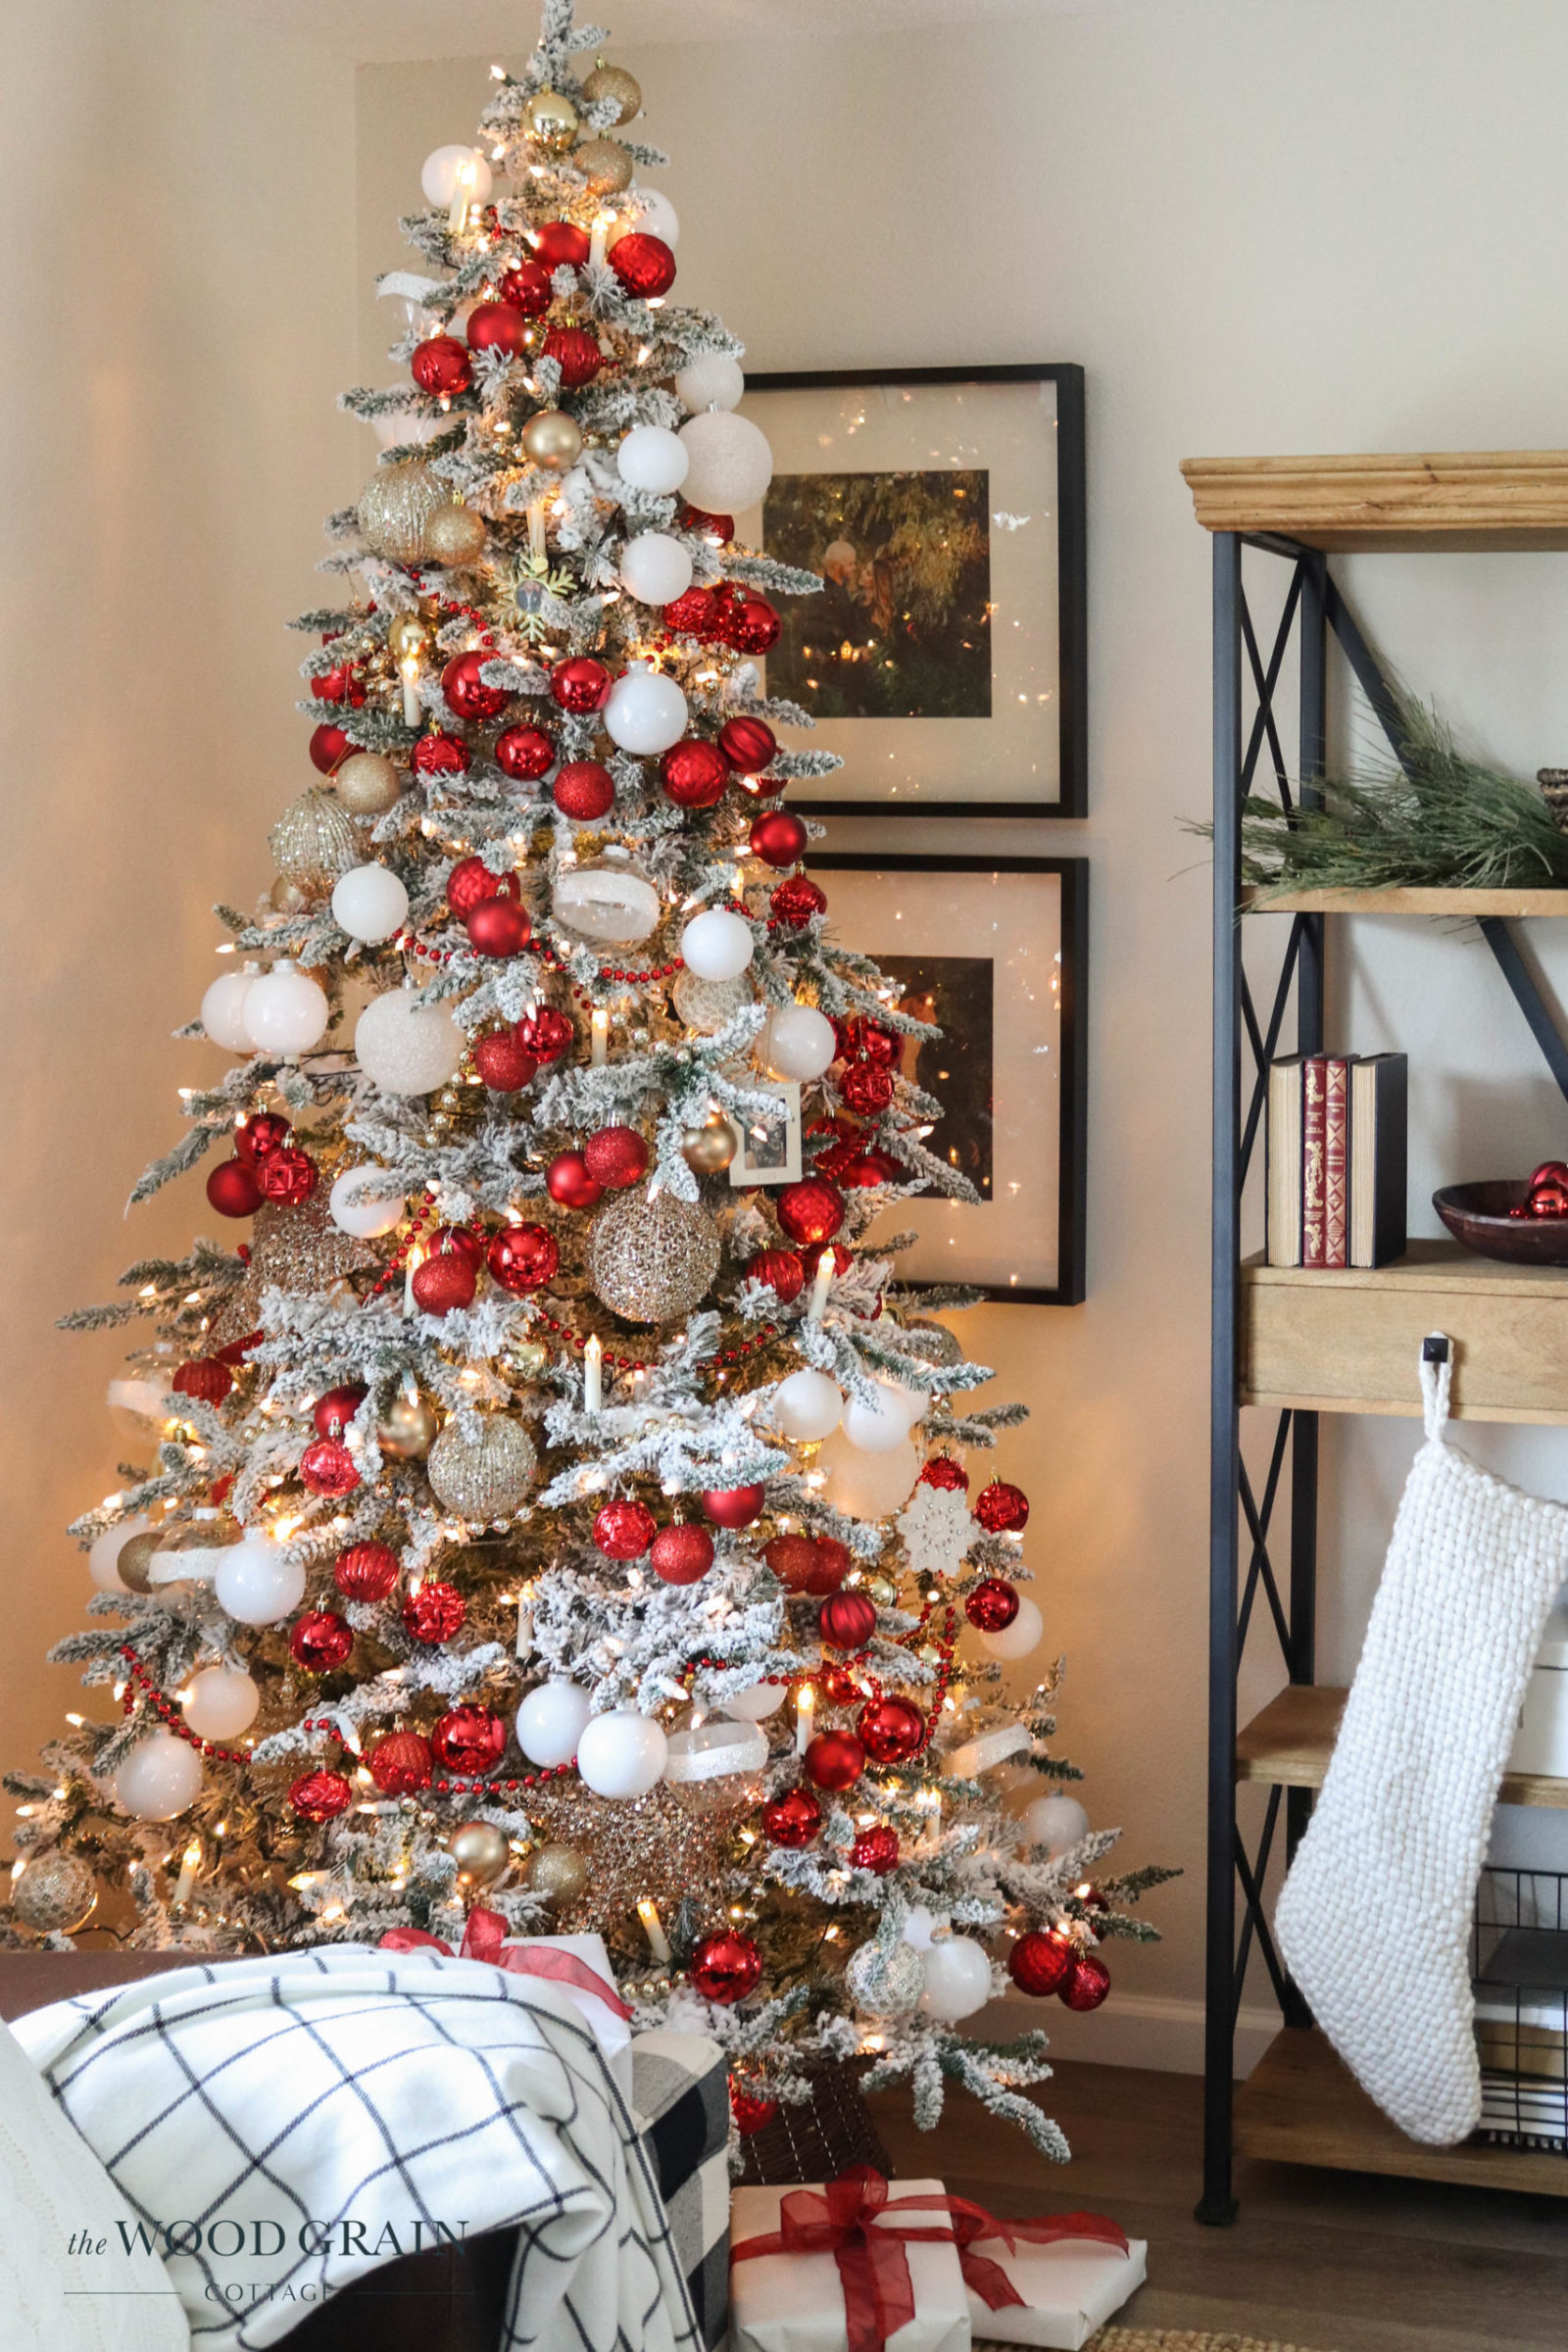 Red, White & Gold Christmas Tree - The Wood Grain Cottage